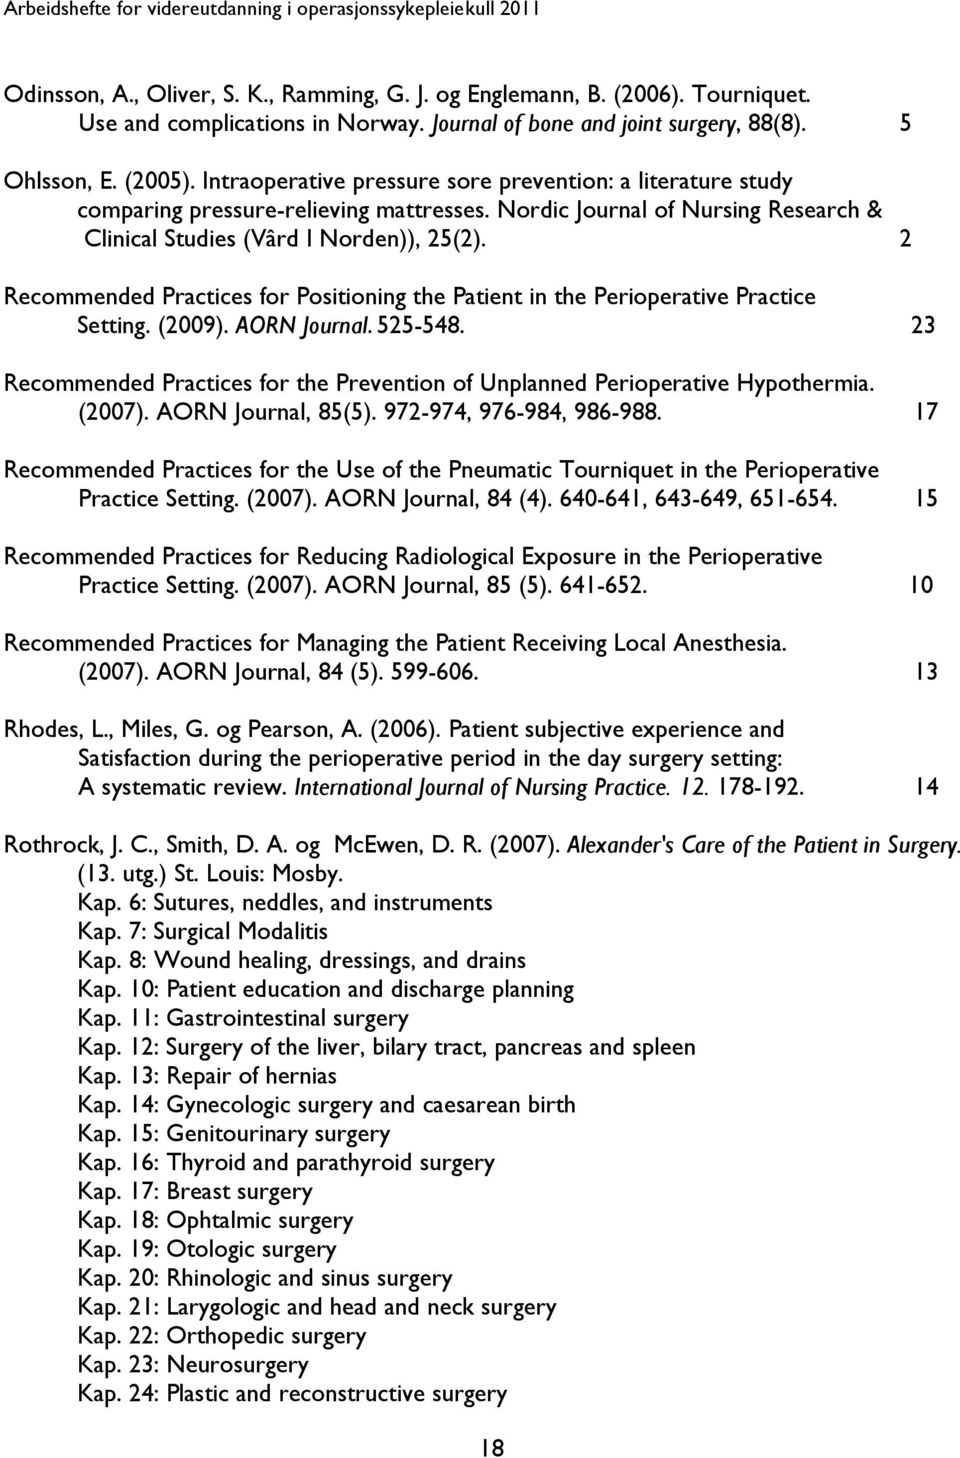 2 Recommended Practices for Positioning the Patient in the Perioperative Practice Setting. (2009). AORN Journal. 525-548.